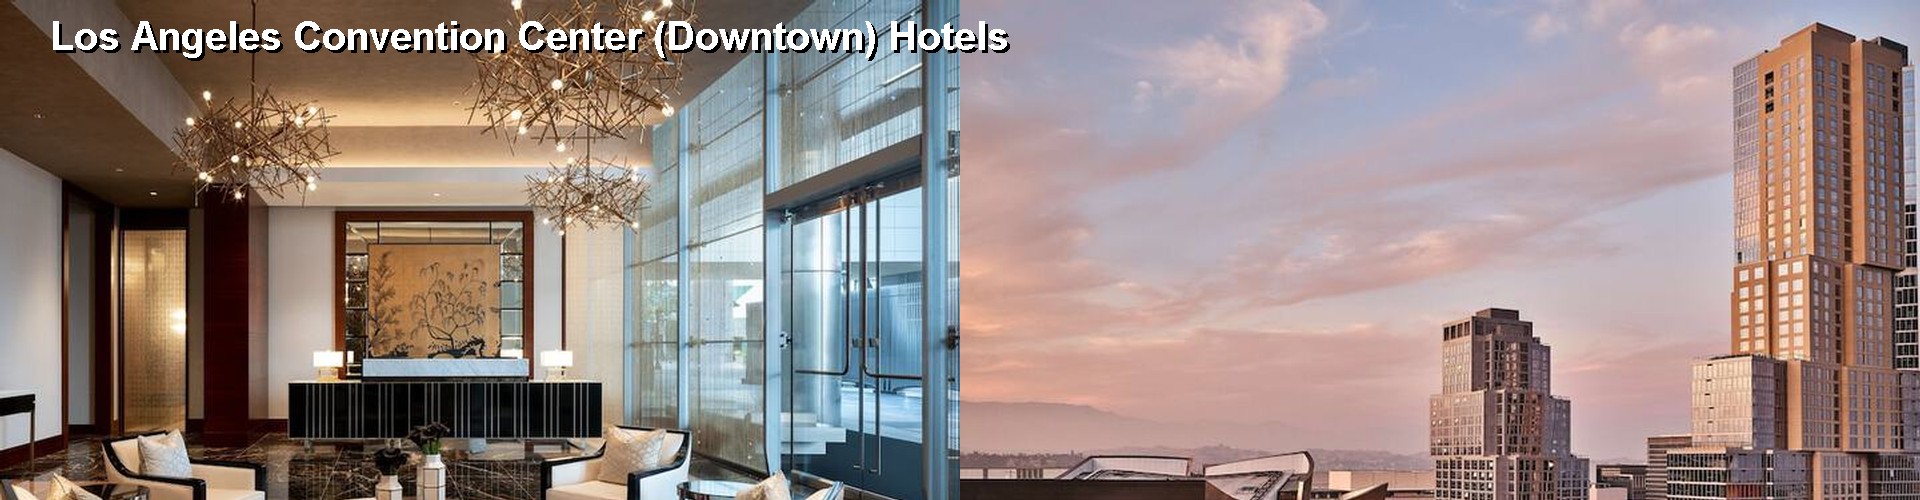 5 Best Hotels near Los Angeles Convention Center (Downtown)